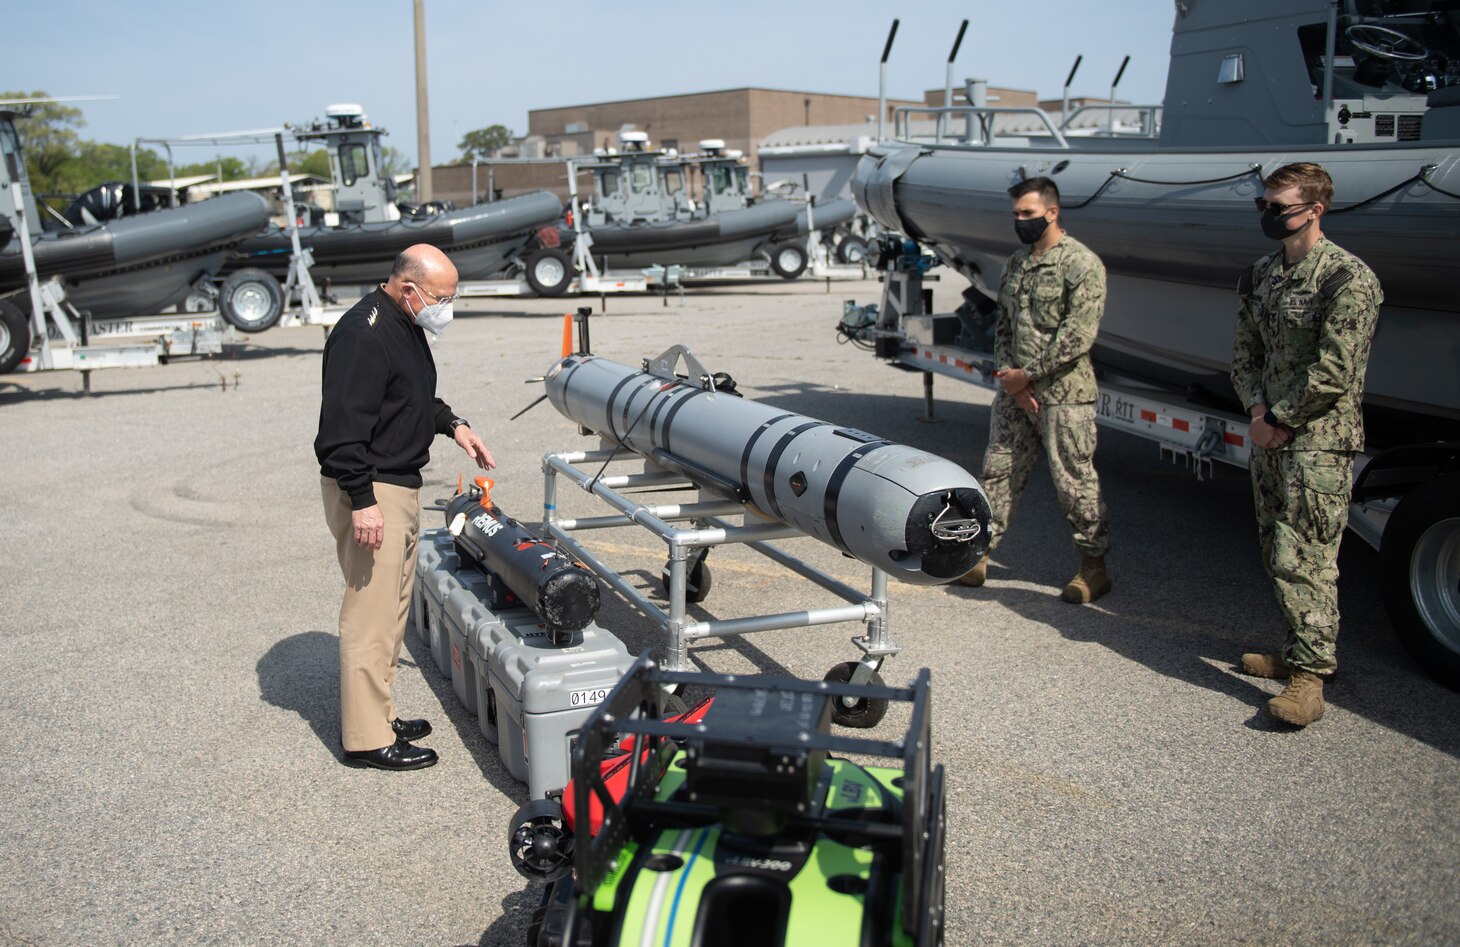 VIRGINIA BEACH, Va. (April 14, 2020) – Chief of Naval Operations Mike Gilday views a MK 18 MOD 2 unmanned undersea vehicle during a tour of Explosive Ordnance Disposal Group (EODGRU) Two STRIKE facility onboard Joint Expeditionary Base Little Creek, April 14, 2021. Gilday and Master Chief Petty Officer of the Navy Russel Smith toured the EODGRU 2 STRIKE facility and met with EOD operators and Navy divers to discuss capabilities and equipment employed by the force. EOD STRIKE protects individuals and teams in the EOD Force from debilitating stress through adaptability, recovery and growth across the personal, social, cognitive and physical wellness domains. (U.S. Navy photo by Mass Communication Specialist Seaman Apprentice Nicholas Skyles)